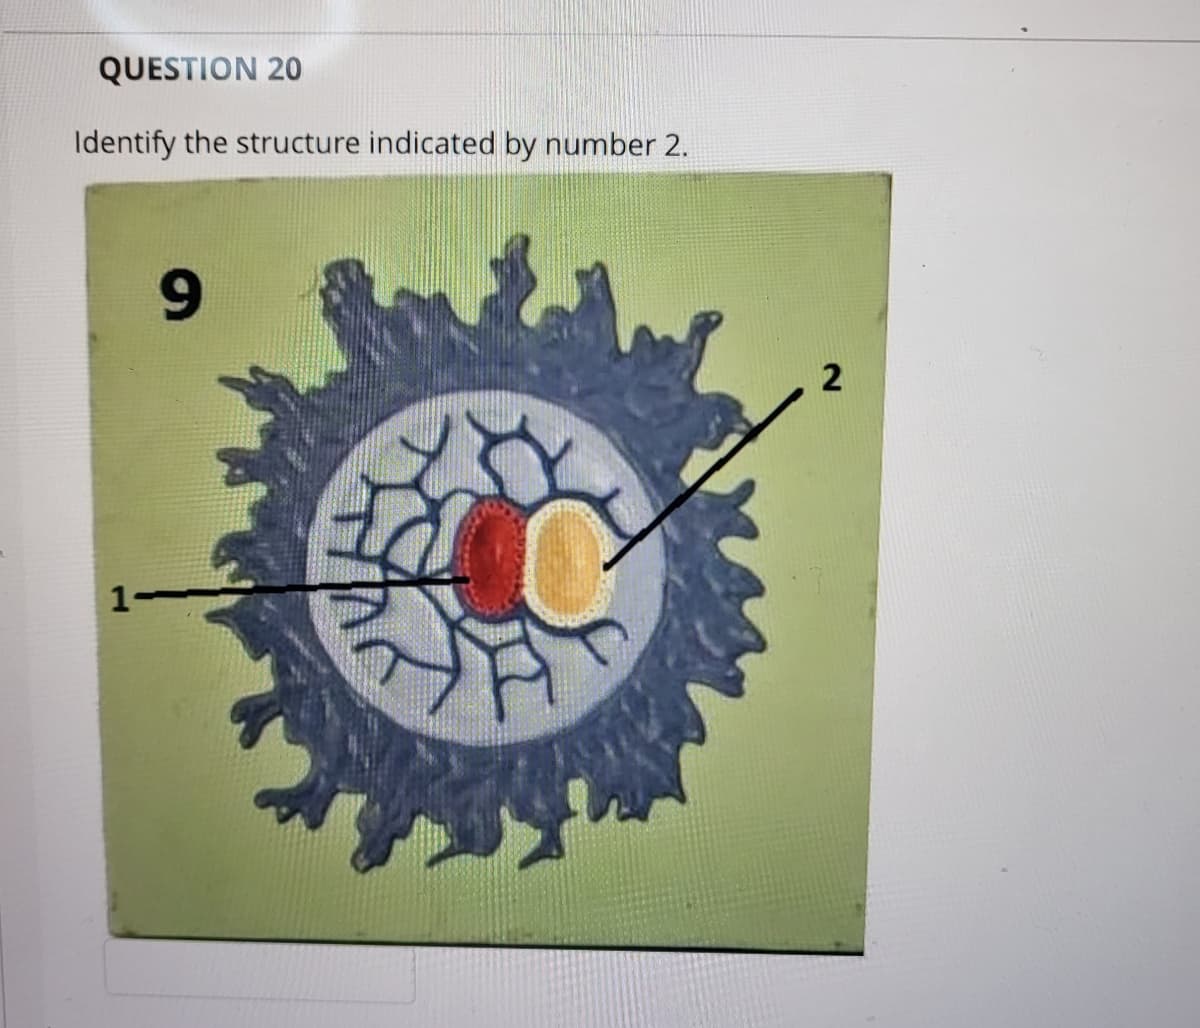 QUESTION 20
Identify the structure indicated by number 2.
1-
9
2